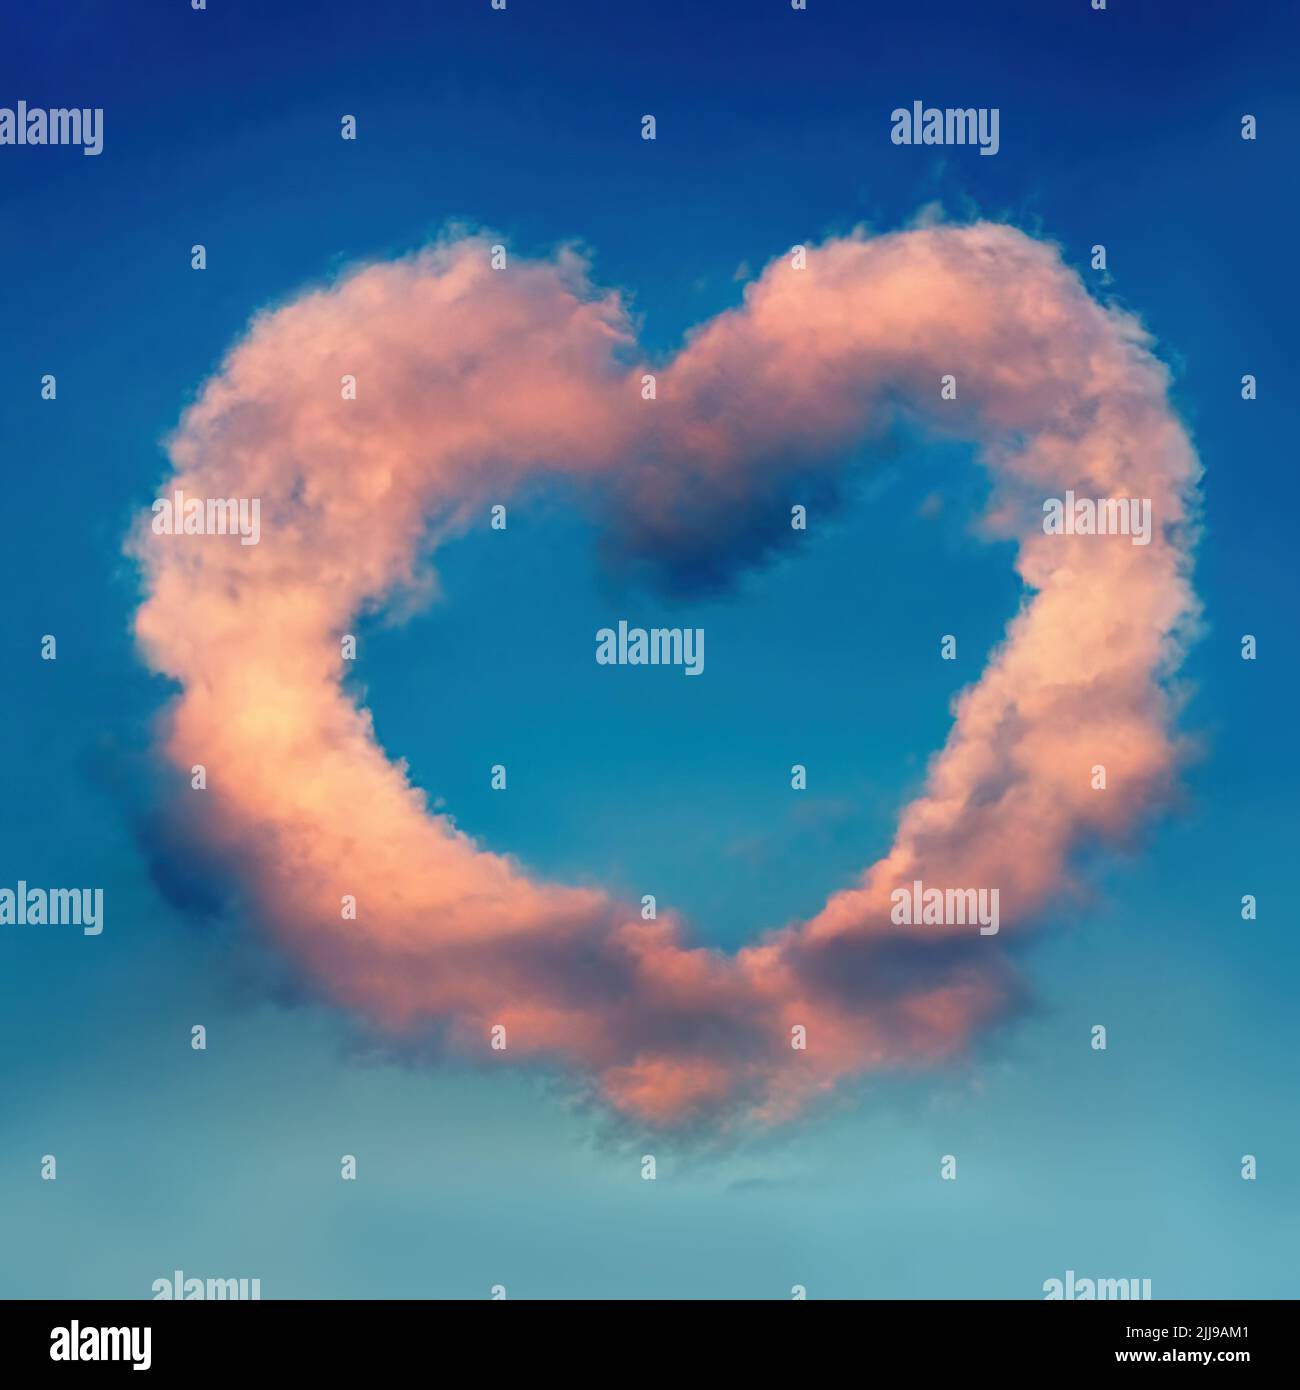 3d rendering of pink heart-shaped cloud over blue sky Stock Photo